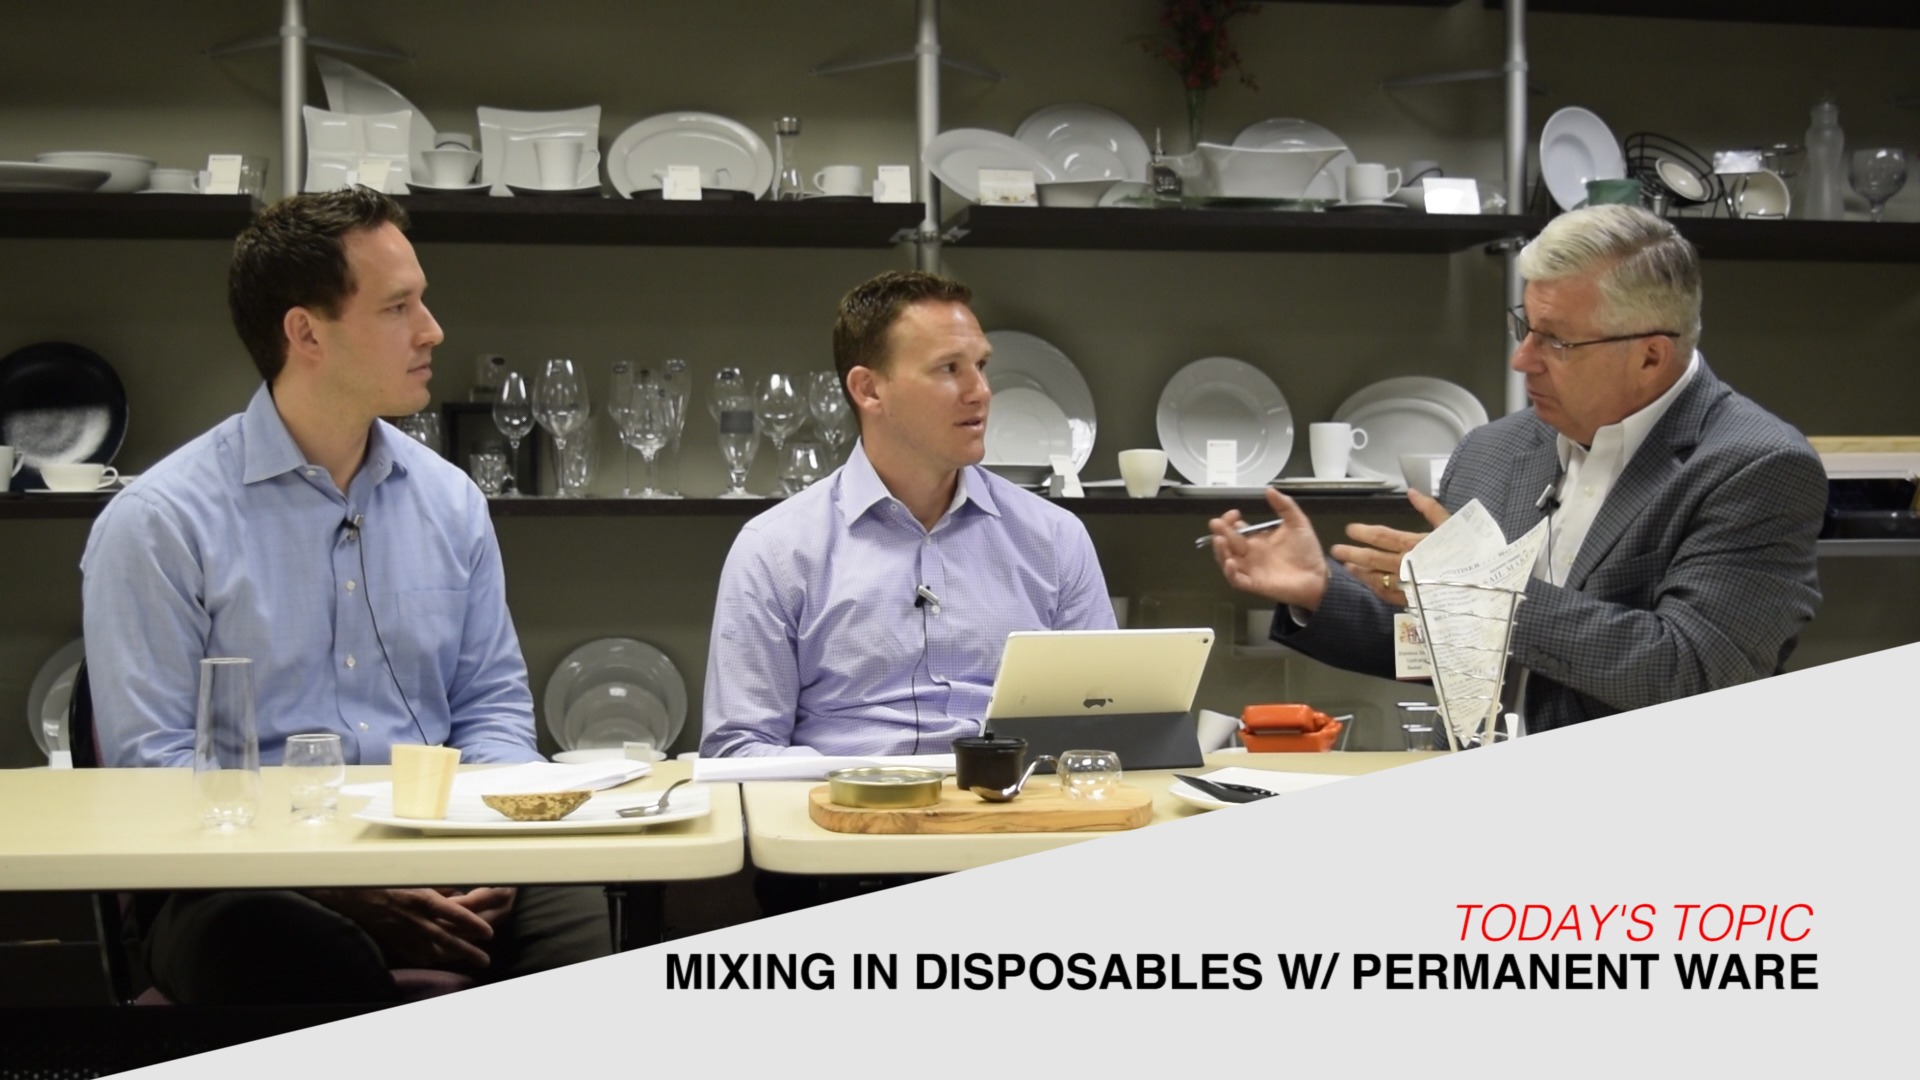 Deconstructing Disposables: Mixing Disposables With Permanent Ware